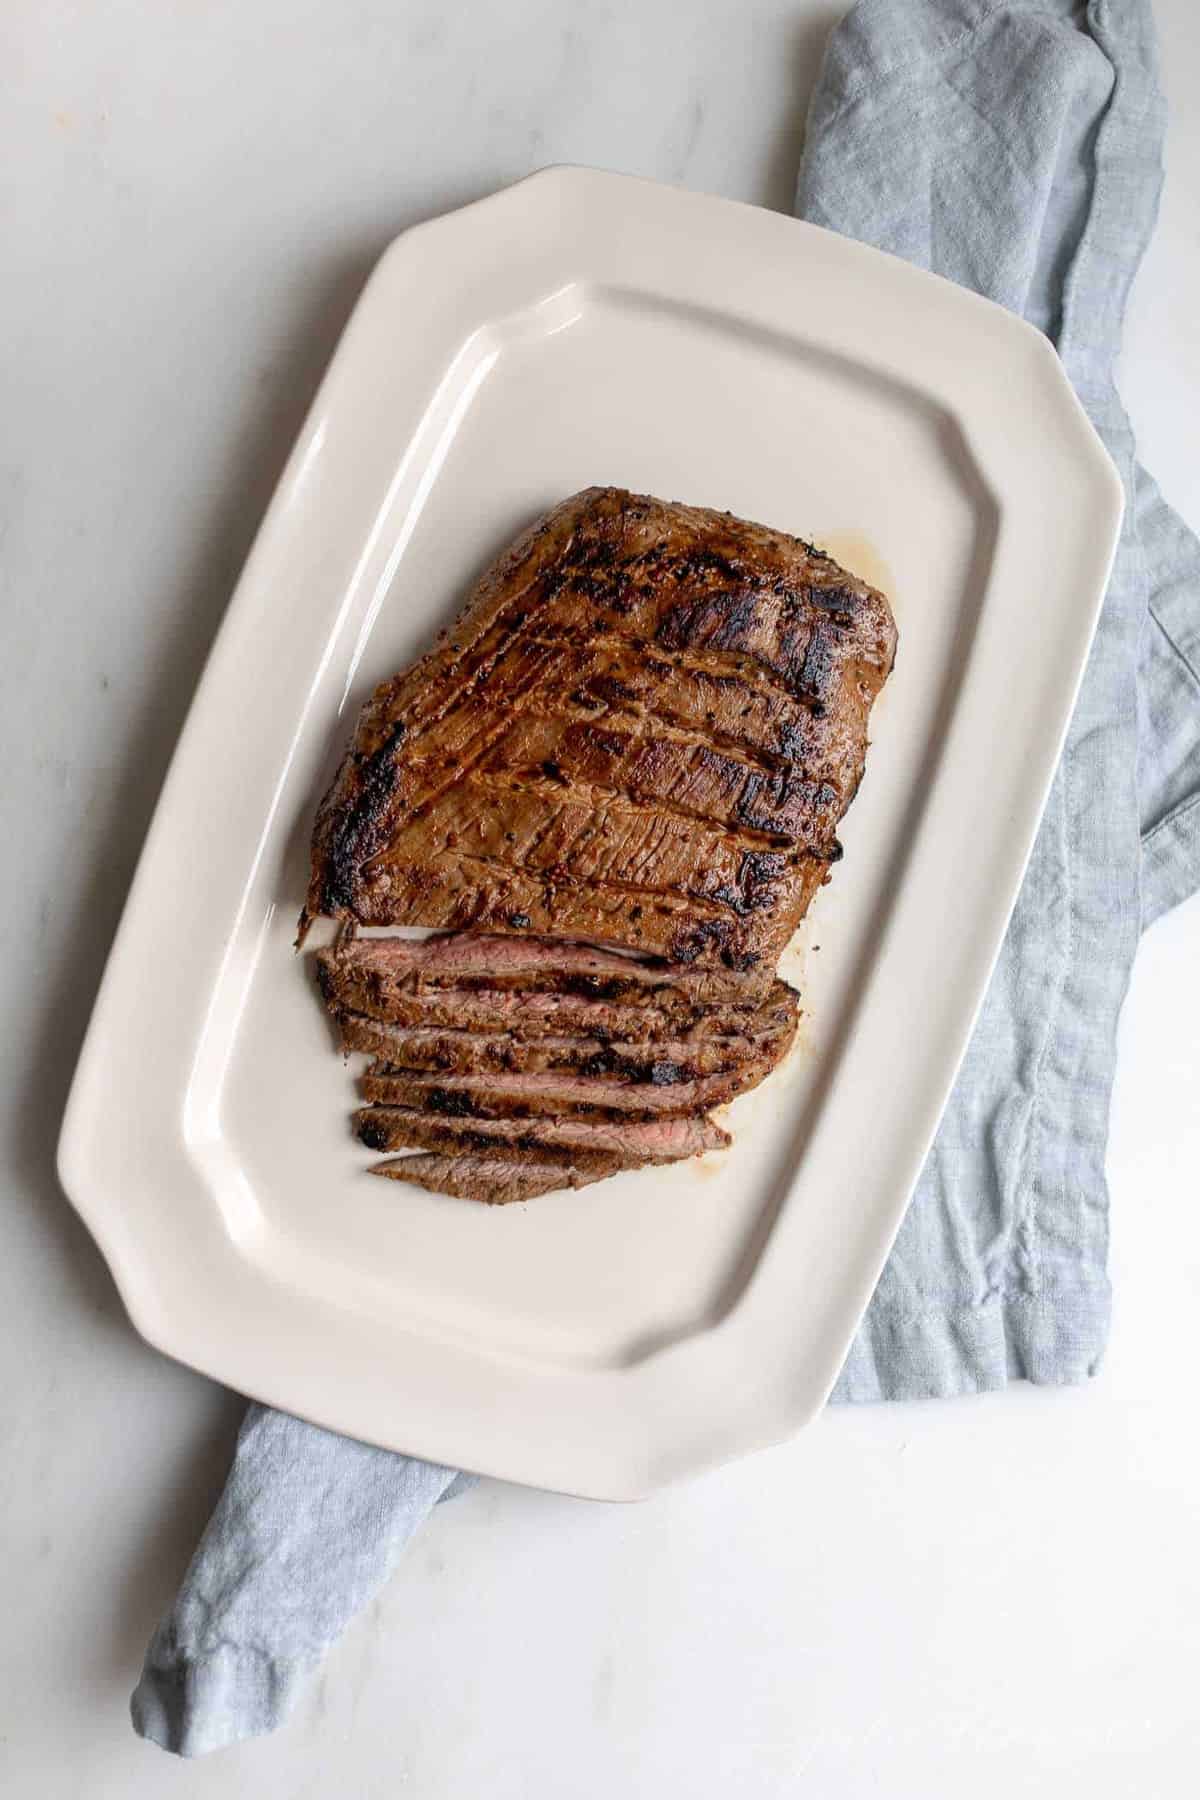 A flank steak after being pan fried on the stove, sliced.